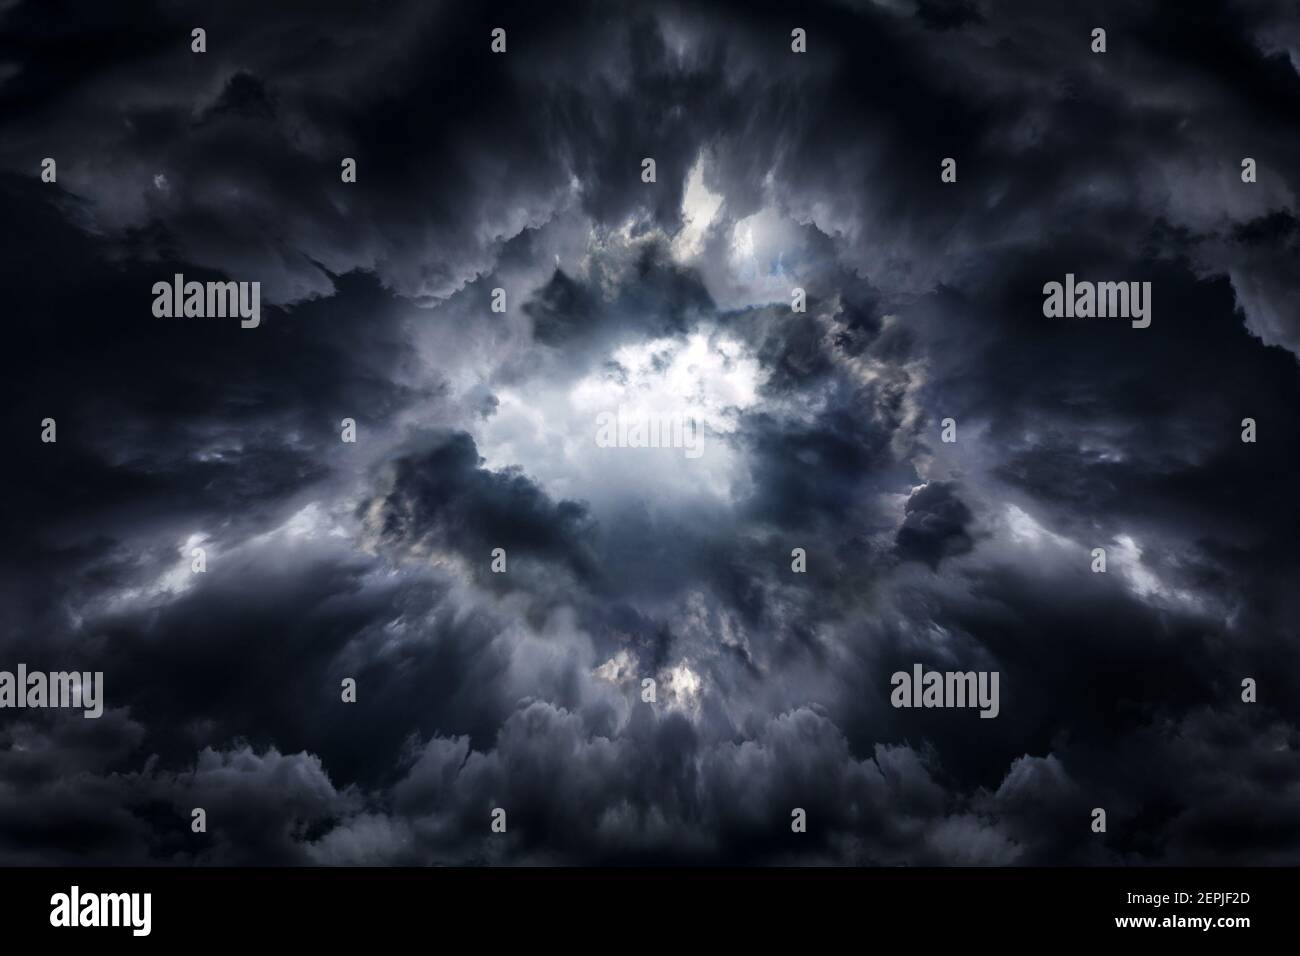 Hole in the Dark and Dramatic Storm Clouds Stock Photo